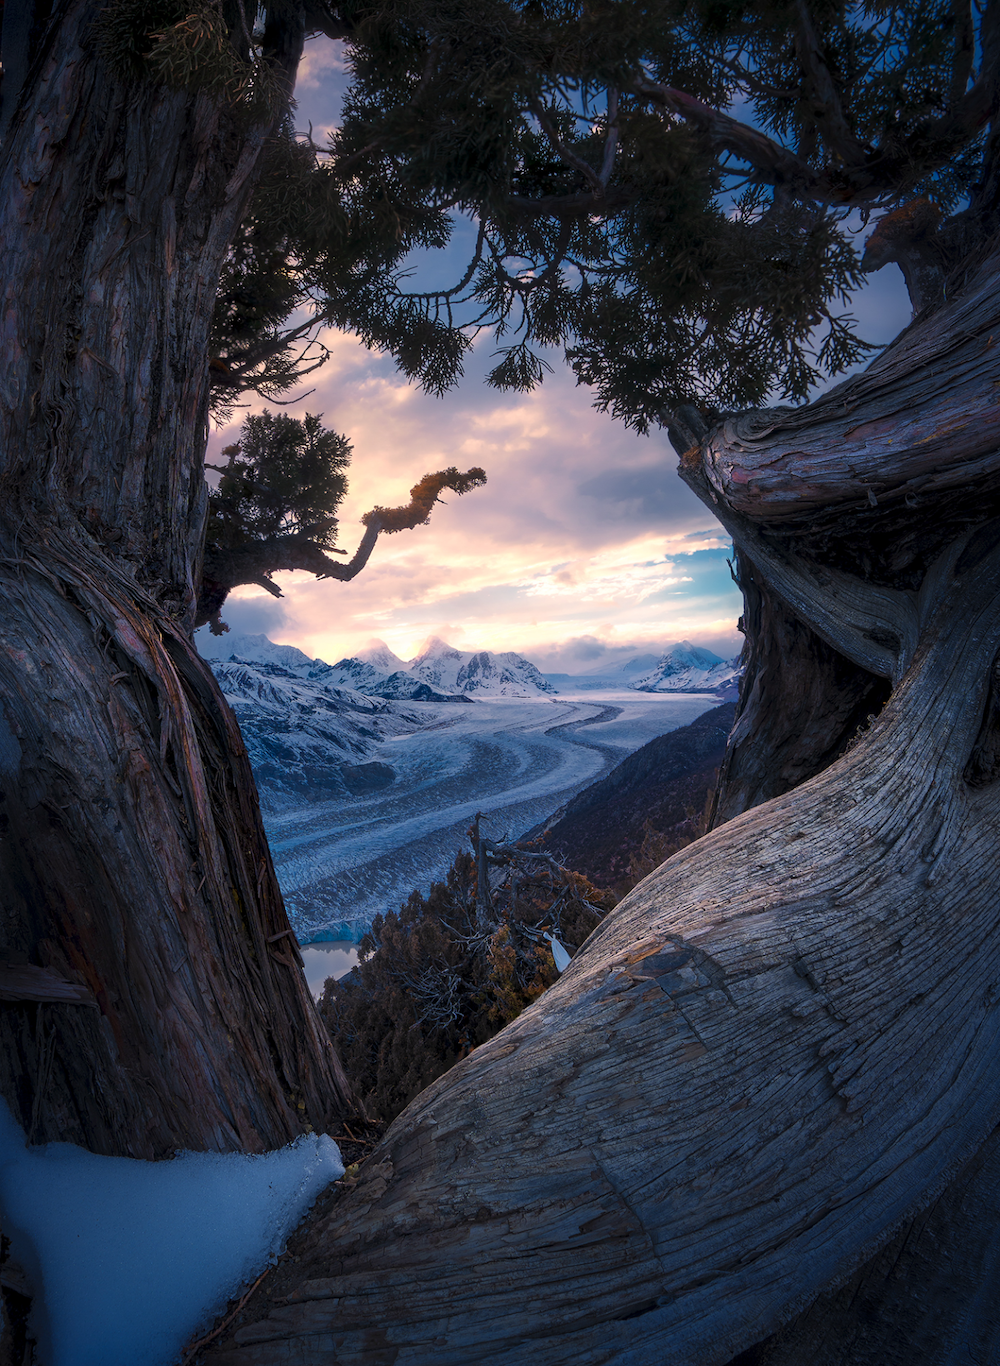 trees frame a photo of a glacier and mountains on a cloudy day